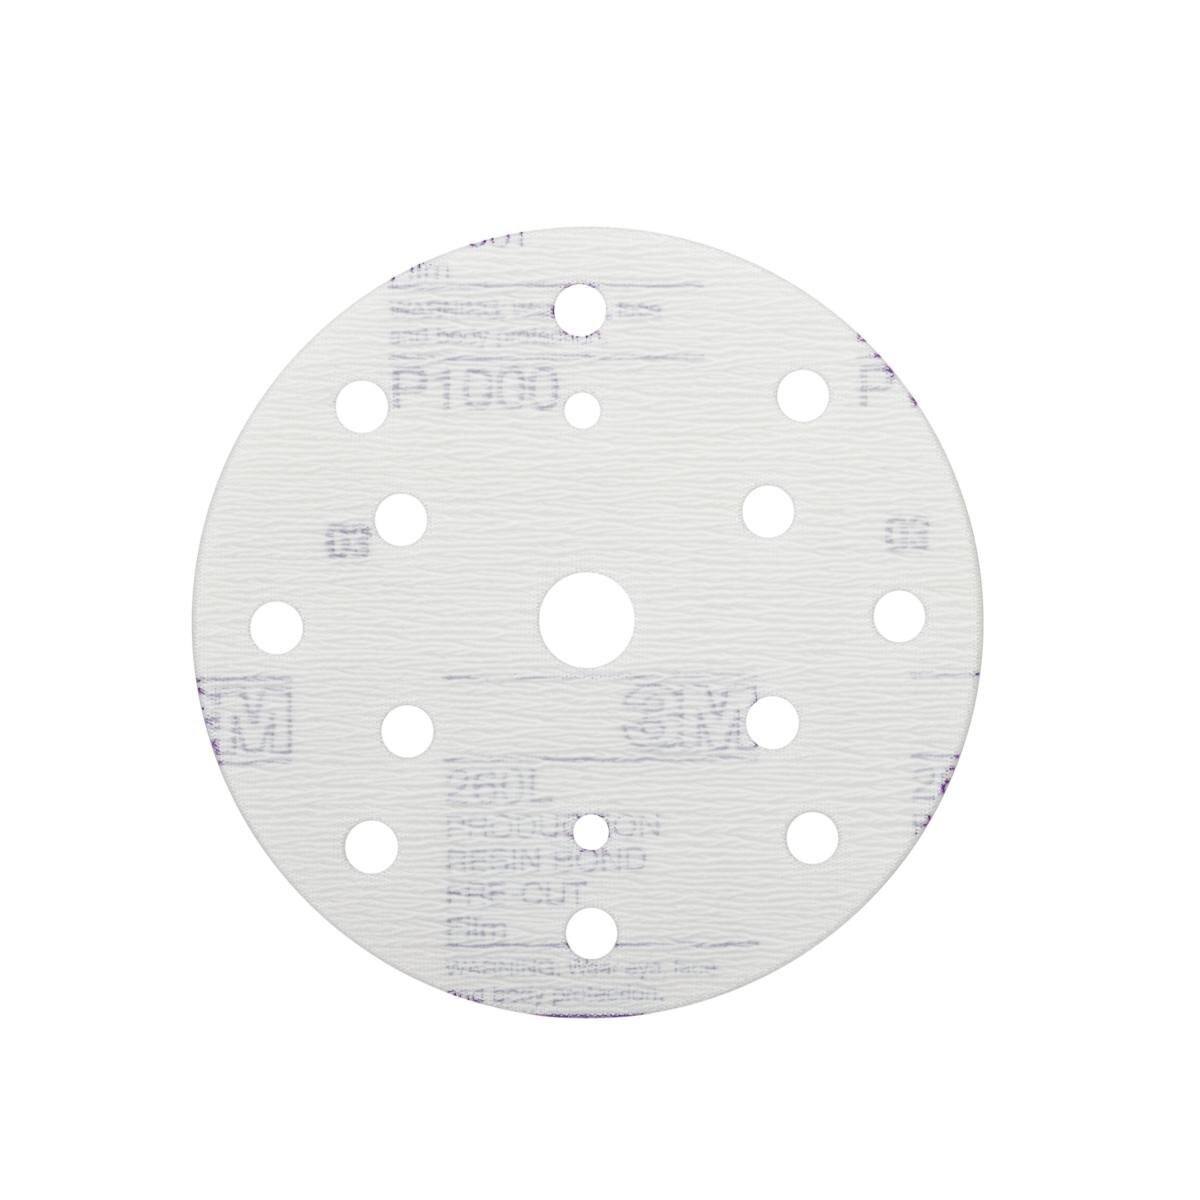 3M Hookit Velcro-backed disc 260L, white, 150 mm, P600, perforated 15 times, 51057